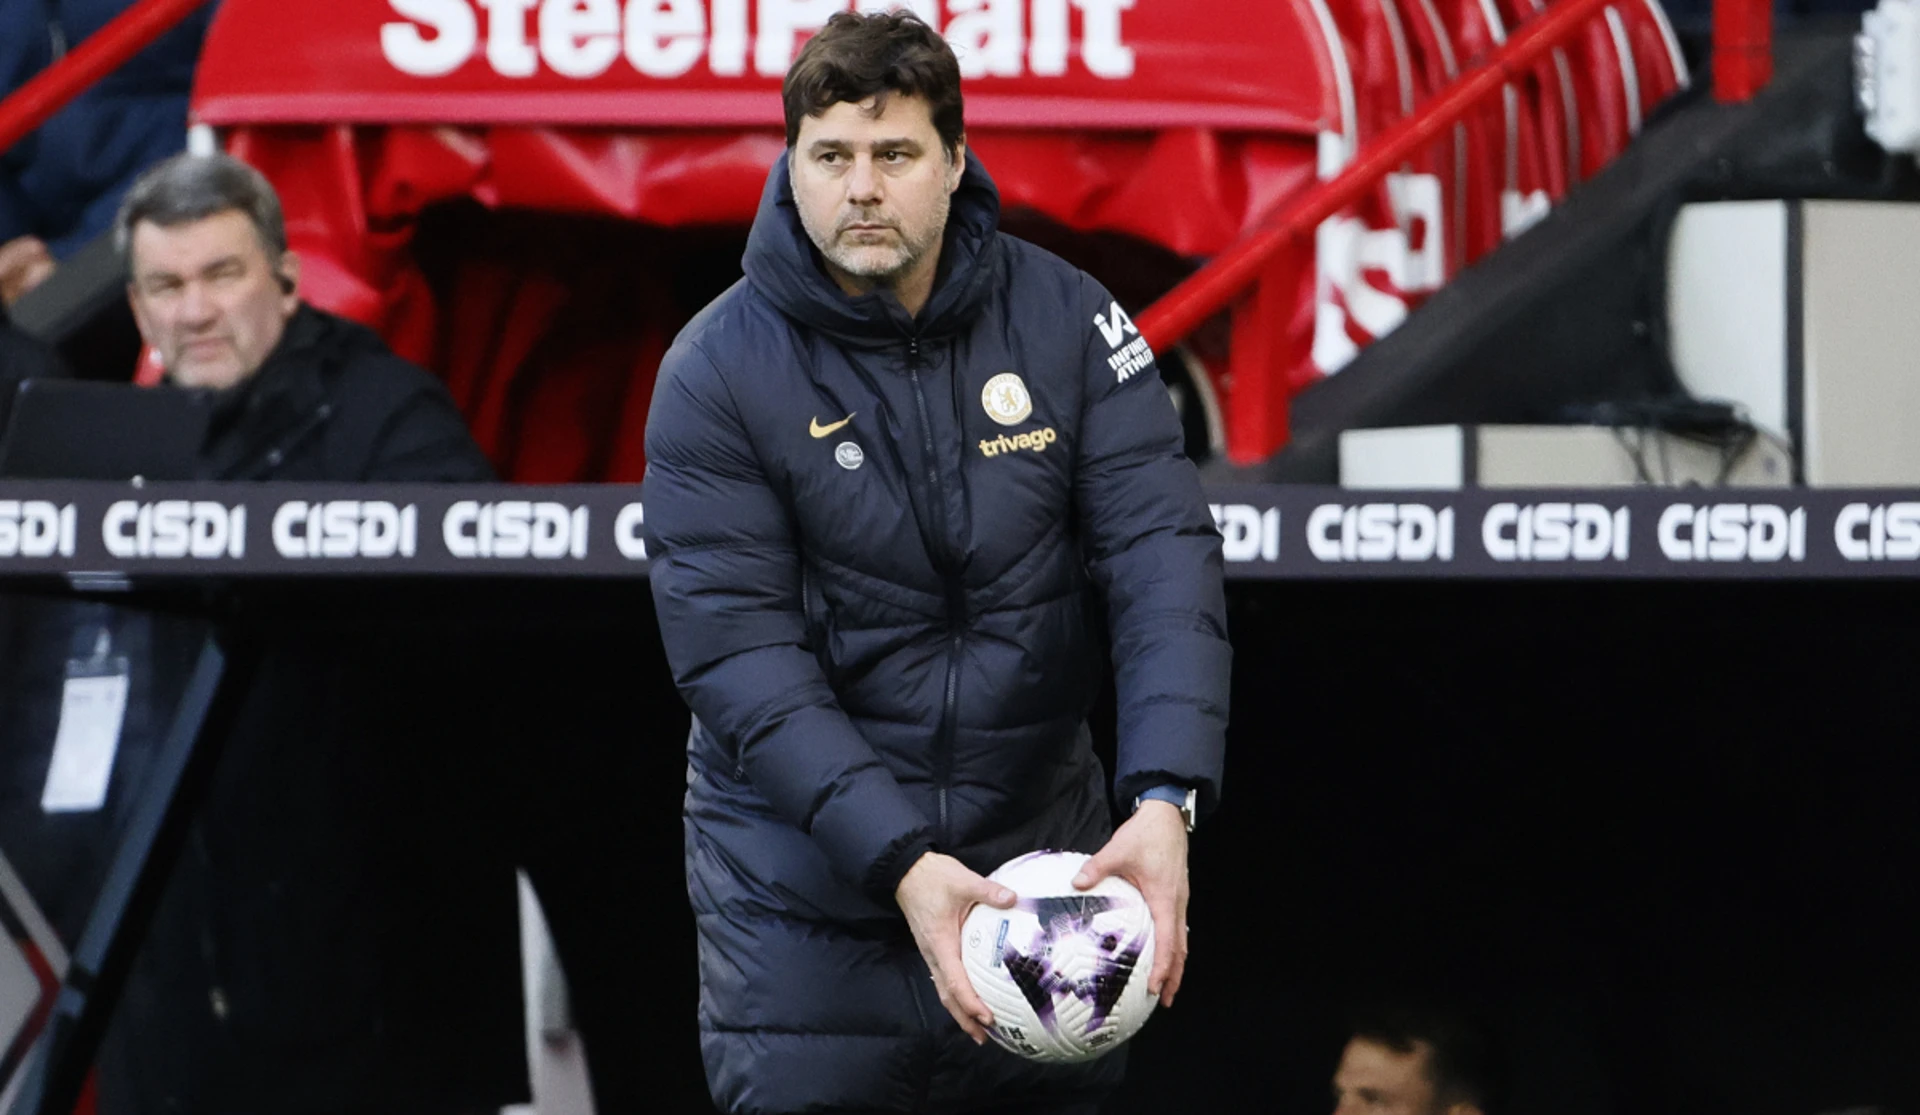 'Not fair' to judge Chelsea due to injury problems, says Pochettino